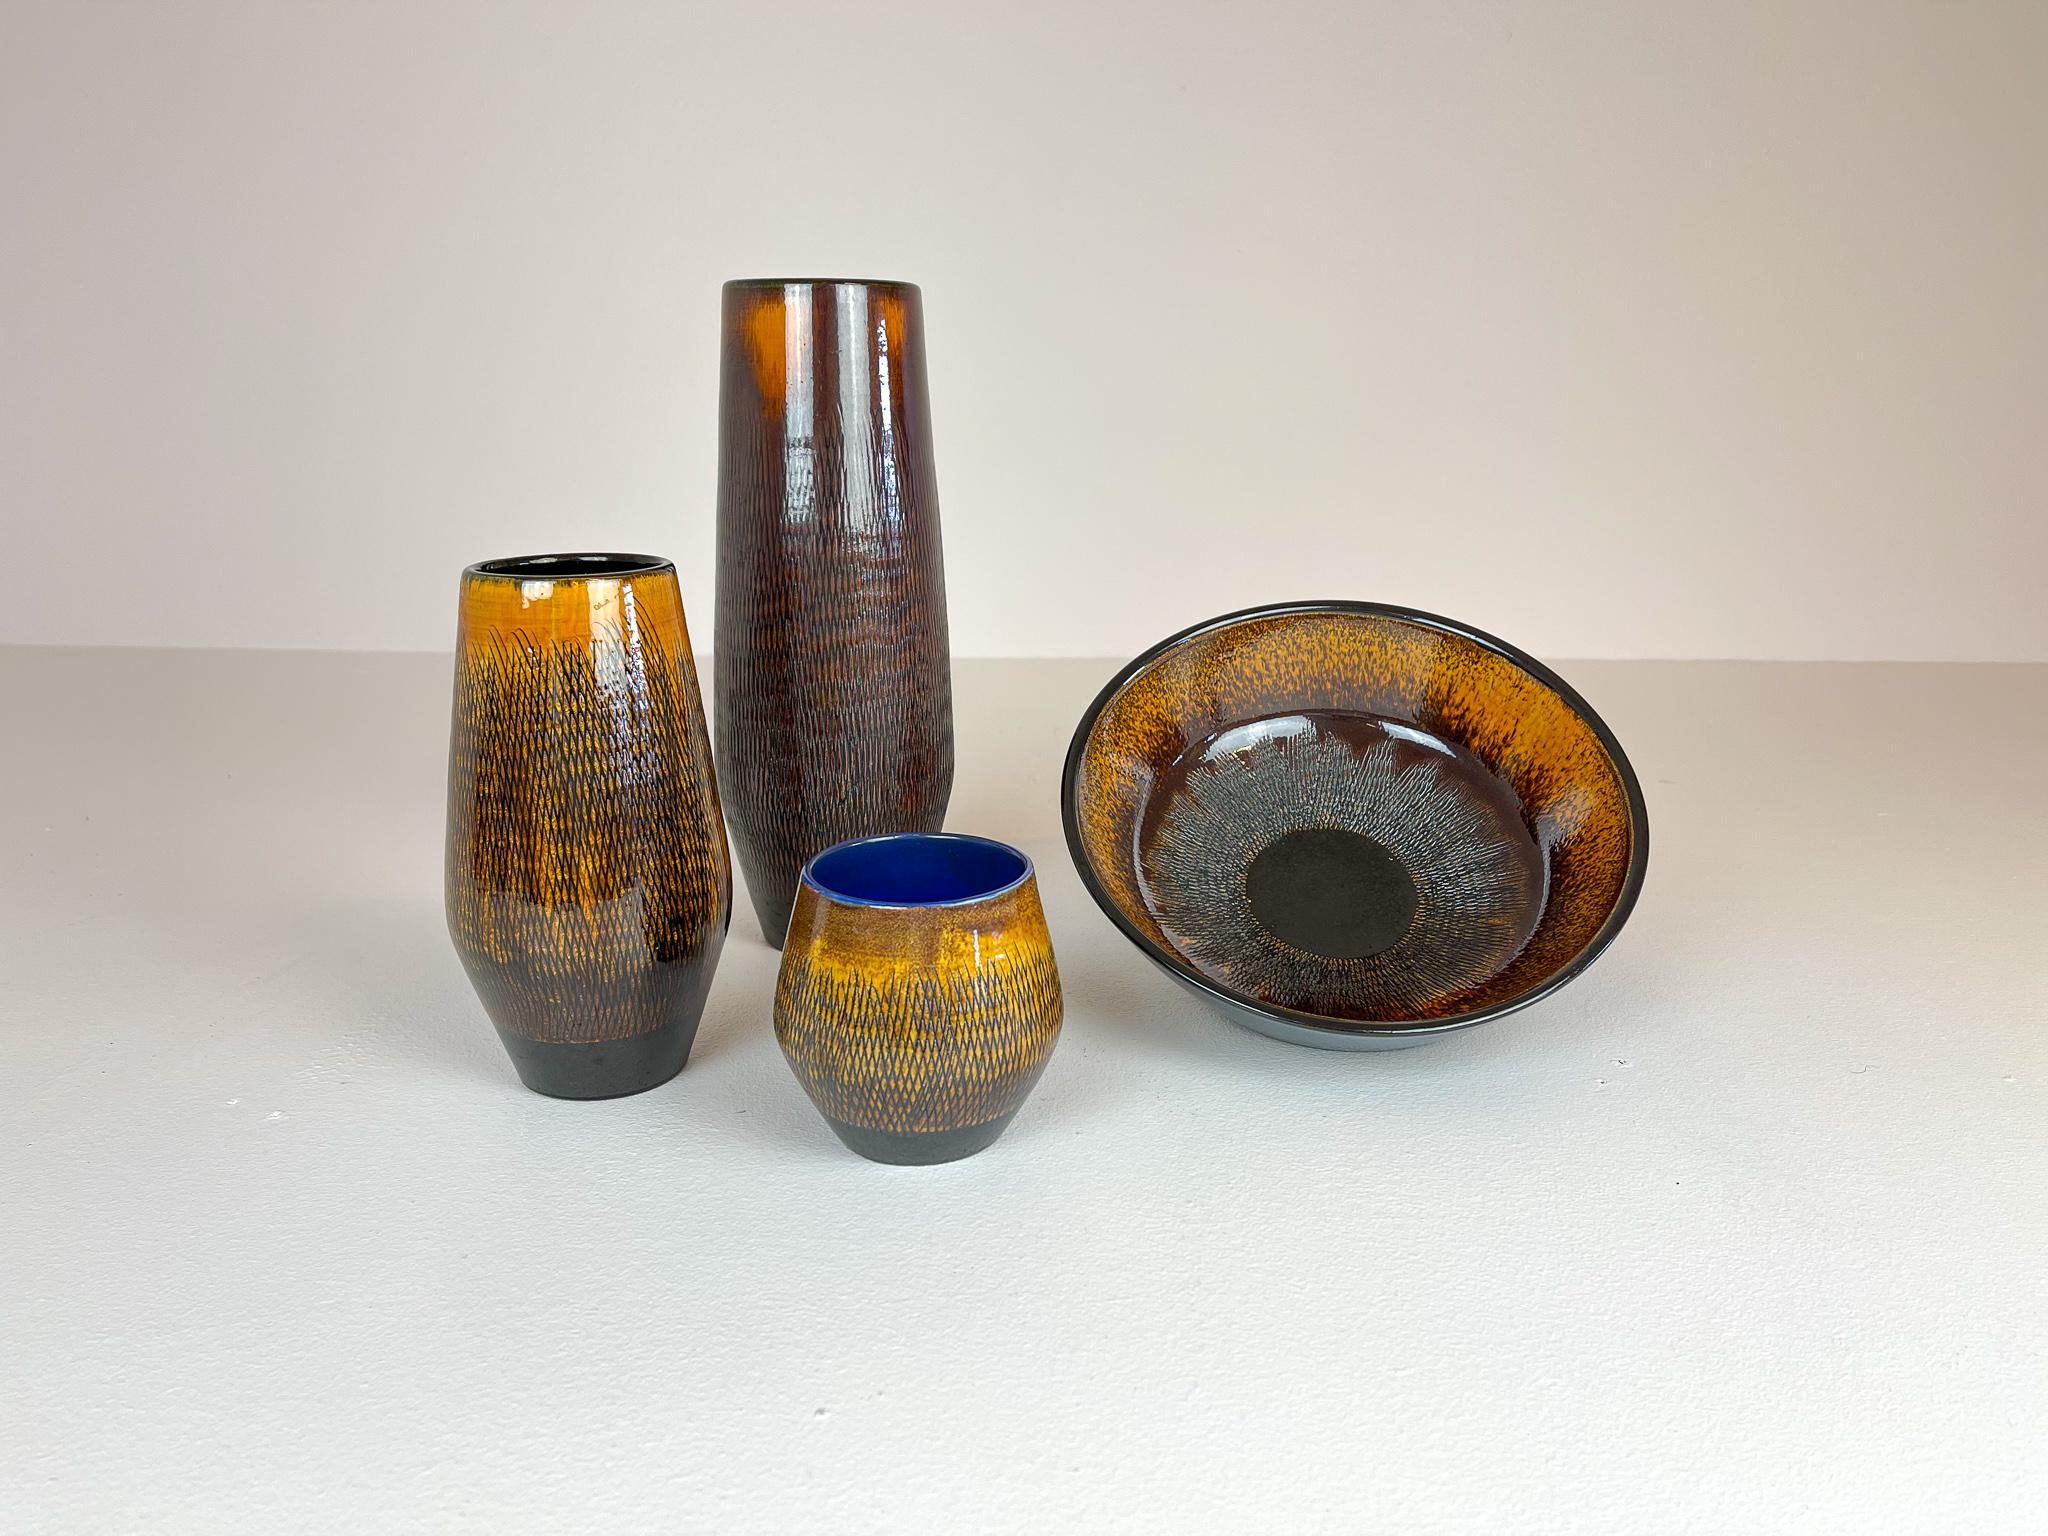 Ingrid Atterberg is the creator of these vases produced in Sweden at Upsala Ekeby in the 1960s. Wonderful sculptured with a nice glaze. 

Good condition.

Dimensions. The large H 31 cm, D 10 cm, middle size H 20 cm, D 10cm, small H 10, D 11 cm.